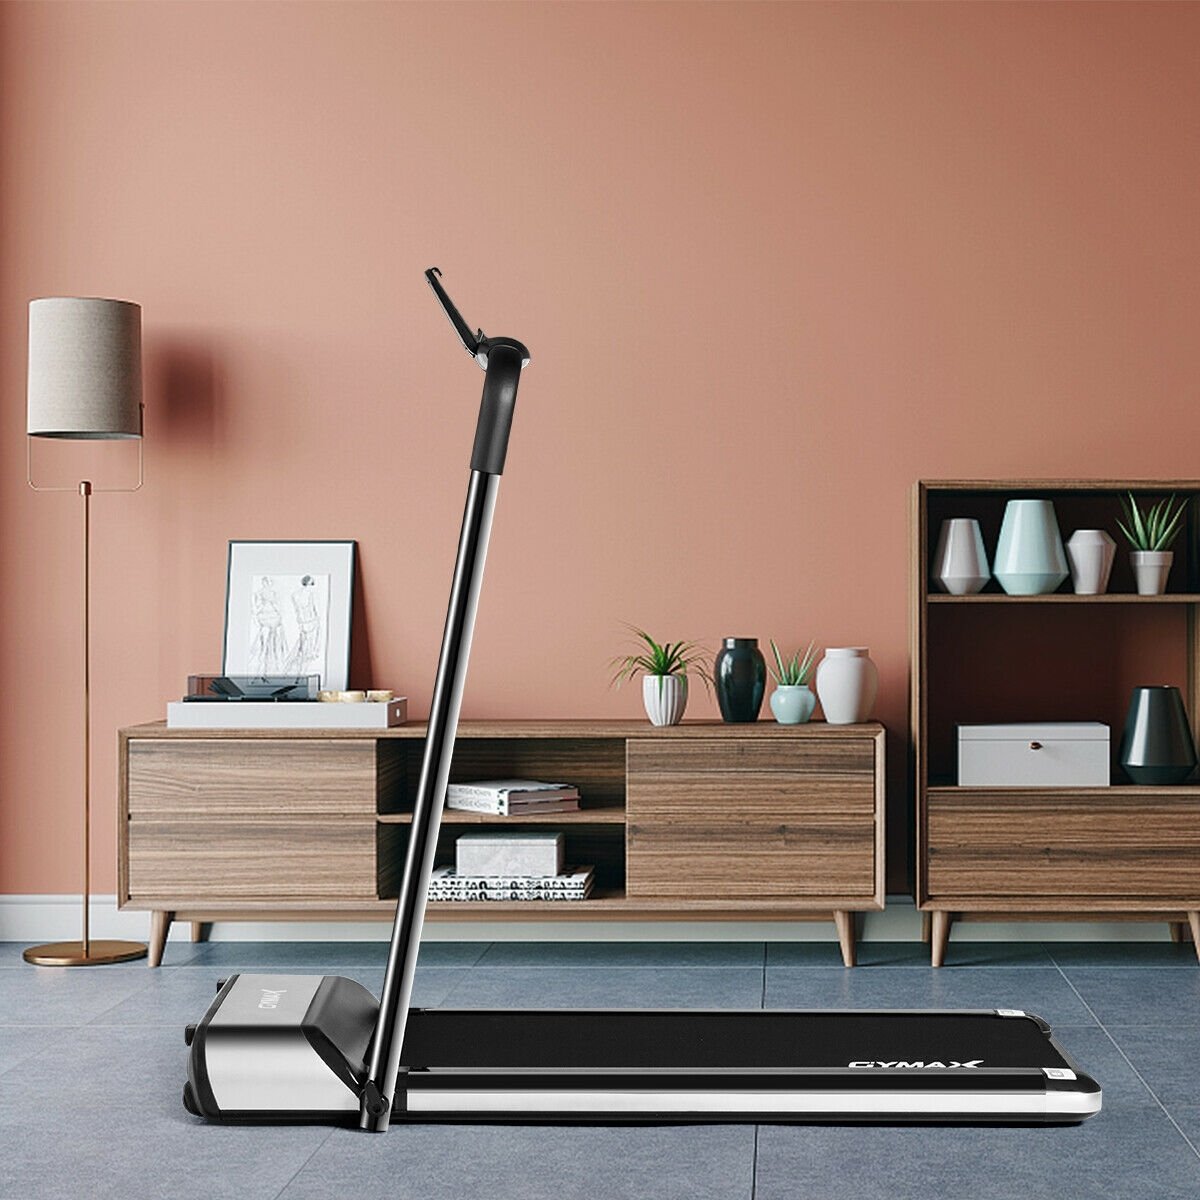 Ultra-thin Electric Folding Motorized Treadmill with LED Monitor Low Noise, Black at Gallery Canada